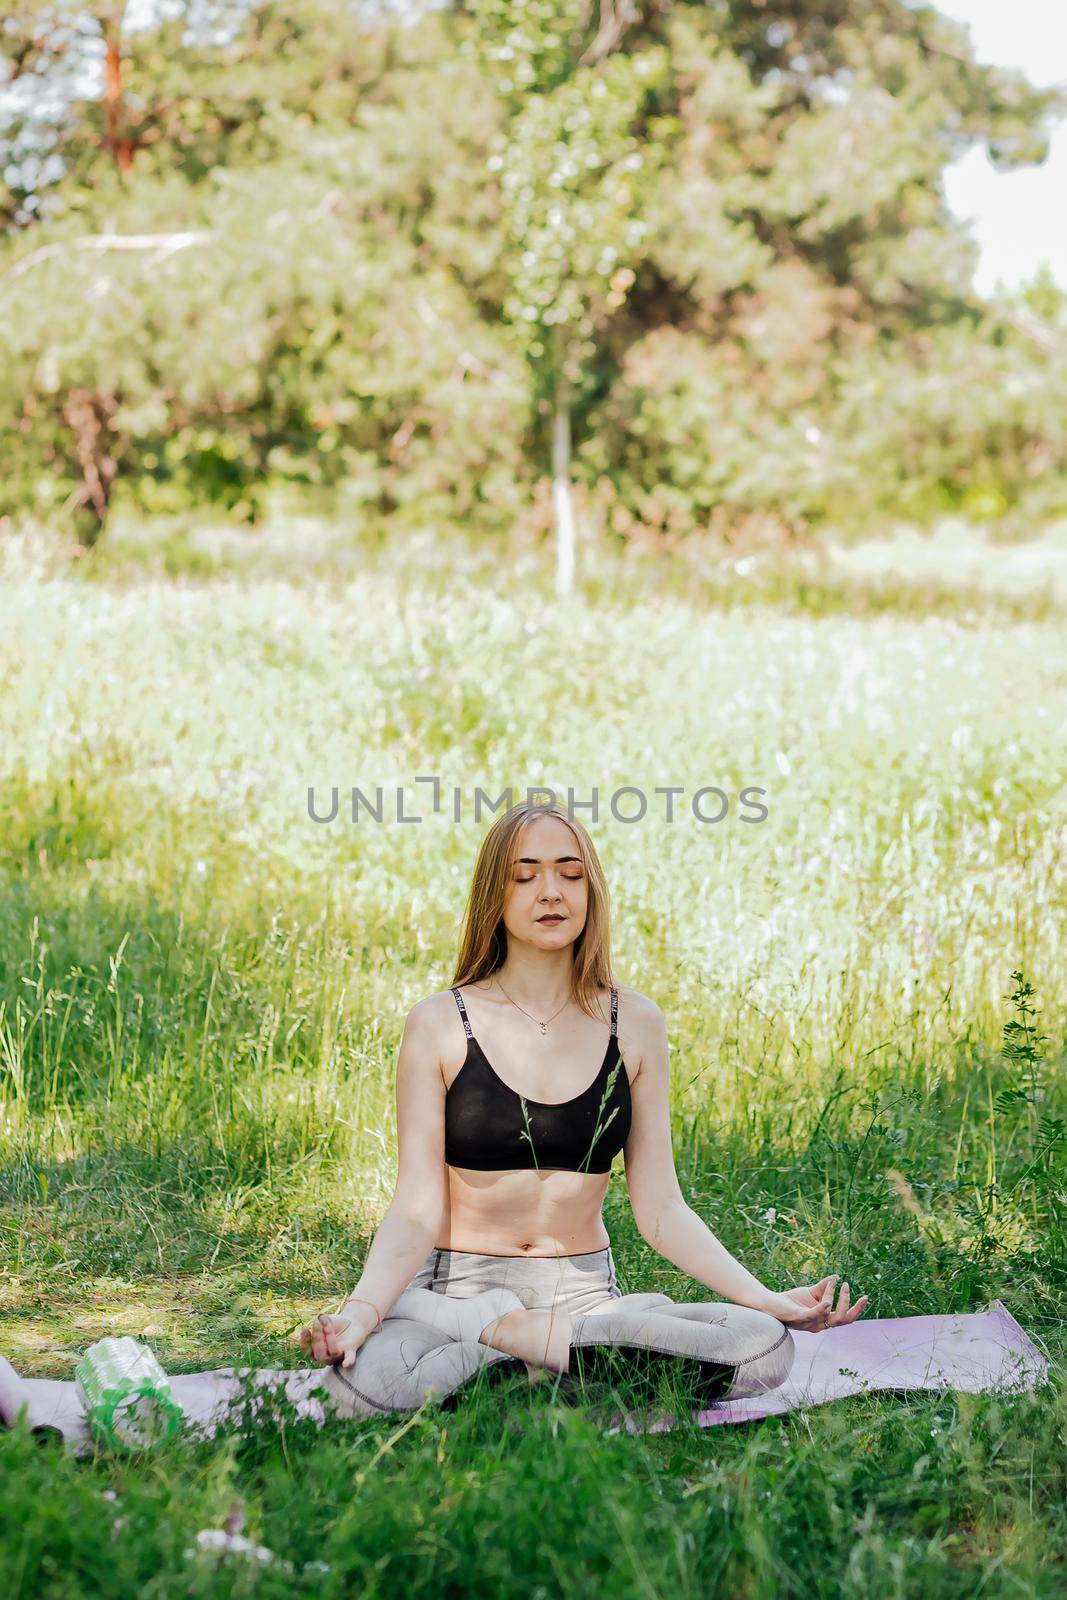 Yoga woman on green grass girl relaxes in the field. Yoga woman in green park girl doing gymnastics outdoors. Meditating woman in meditation in yoga pose practices outdoors